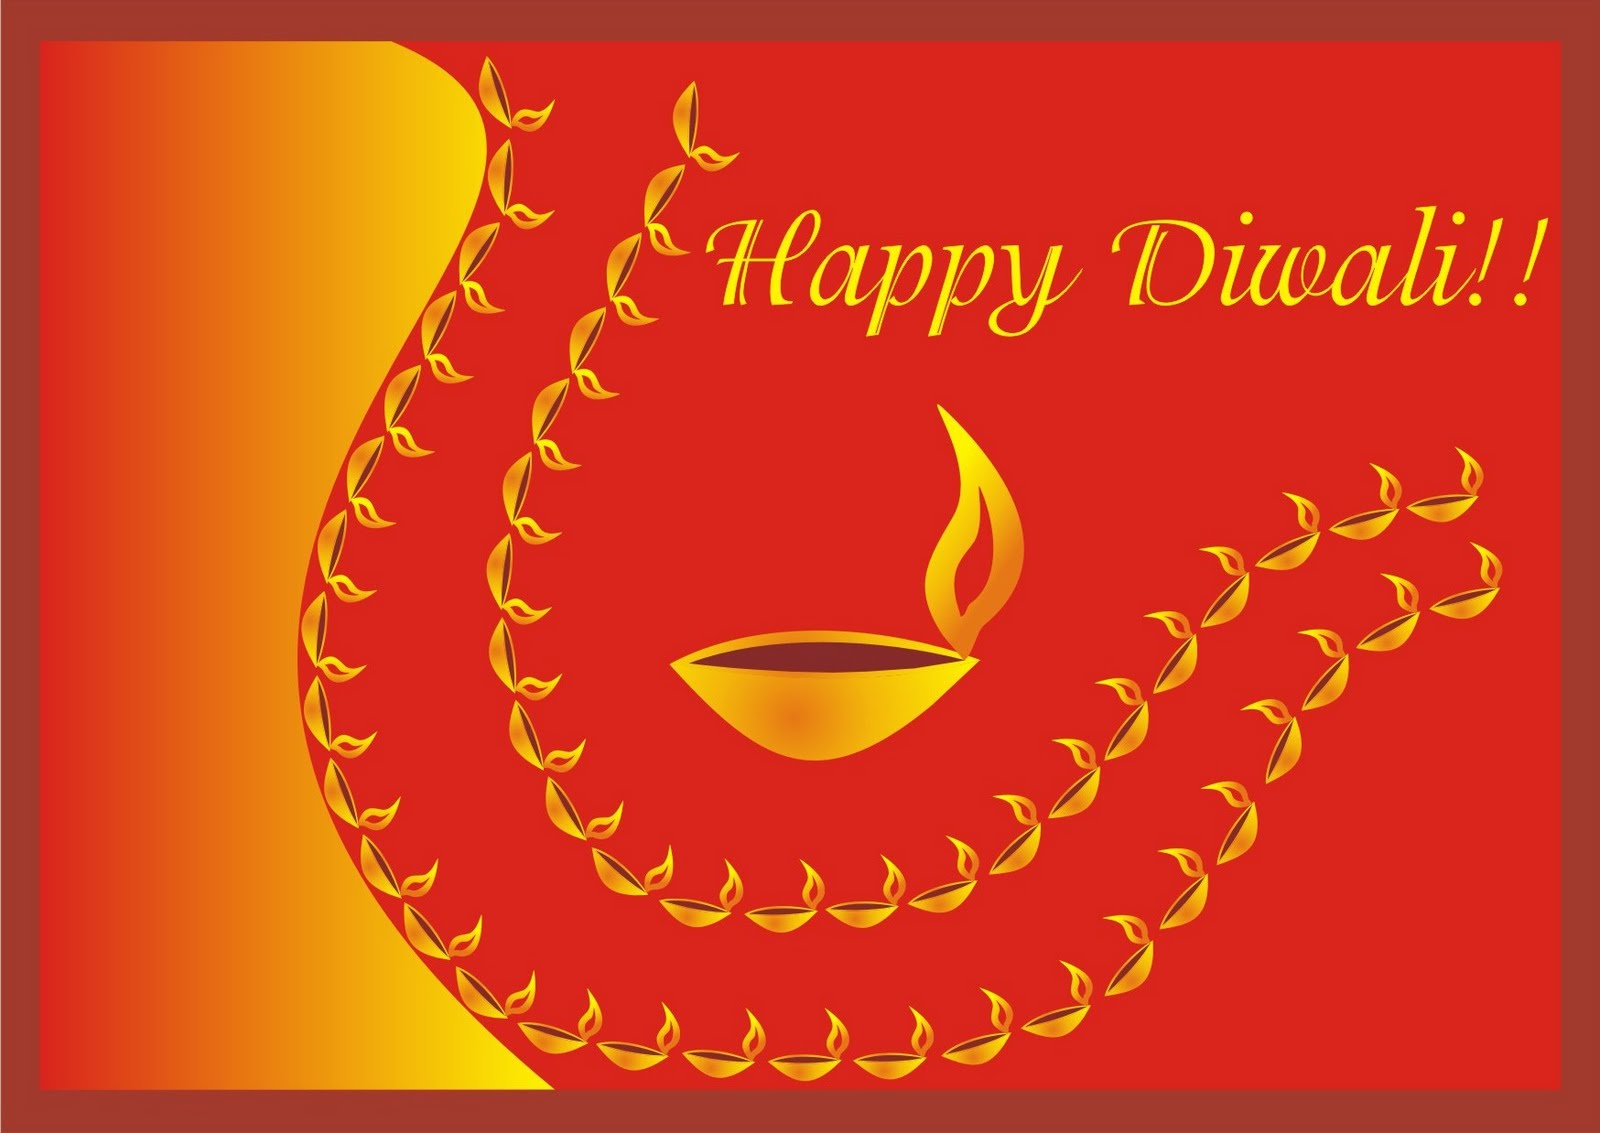 Diwali Celebrations Free PPT Backgrounds for your PowerPoint Templates